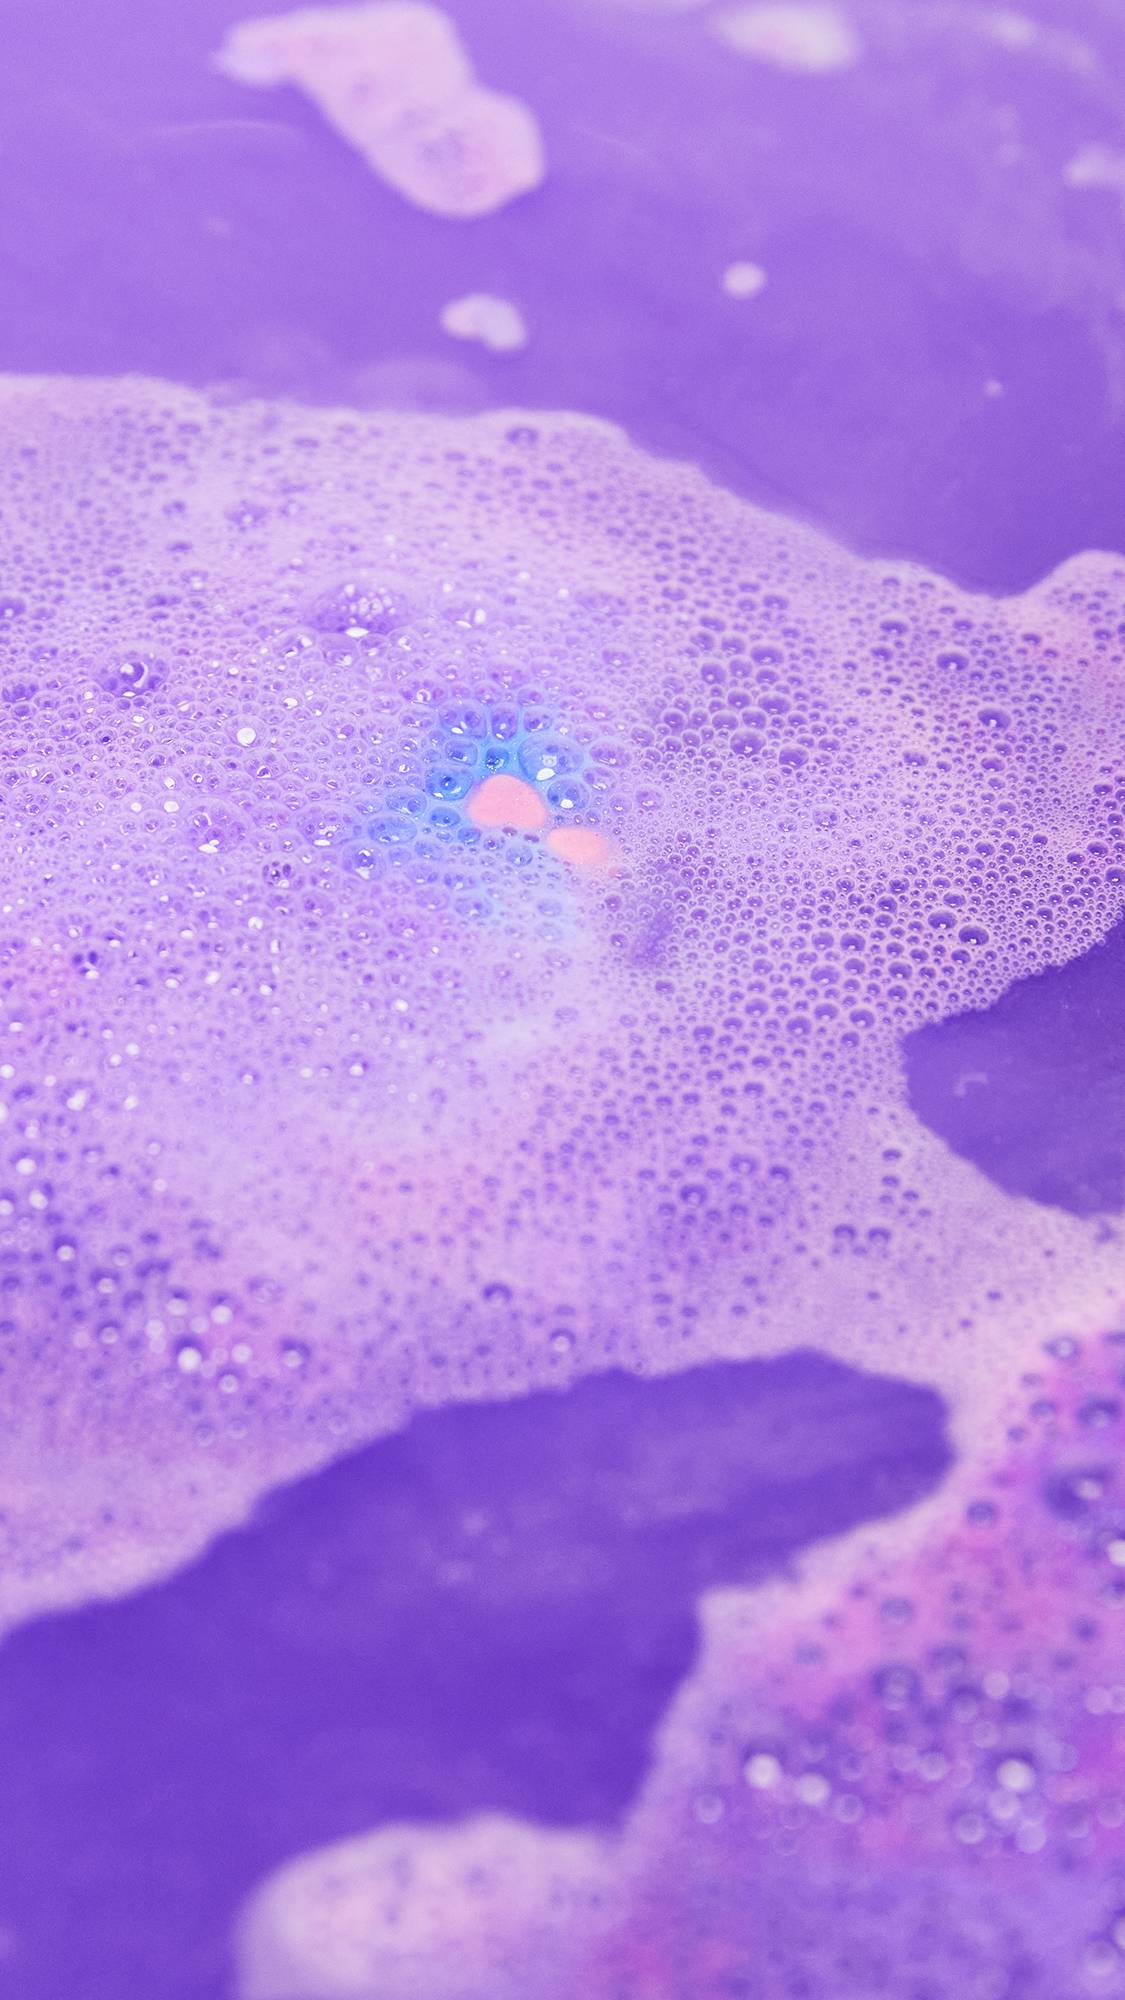 The Love Potion bath bomb is slowly fizzling away leaving deep, pastel purple water and delicate foam.